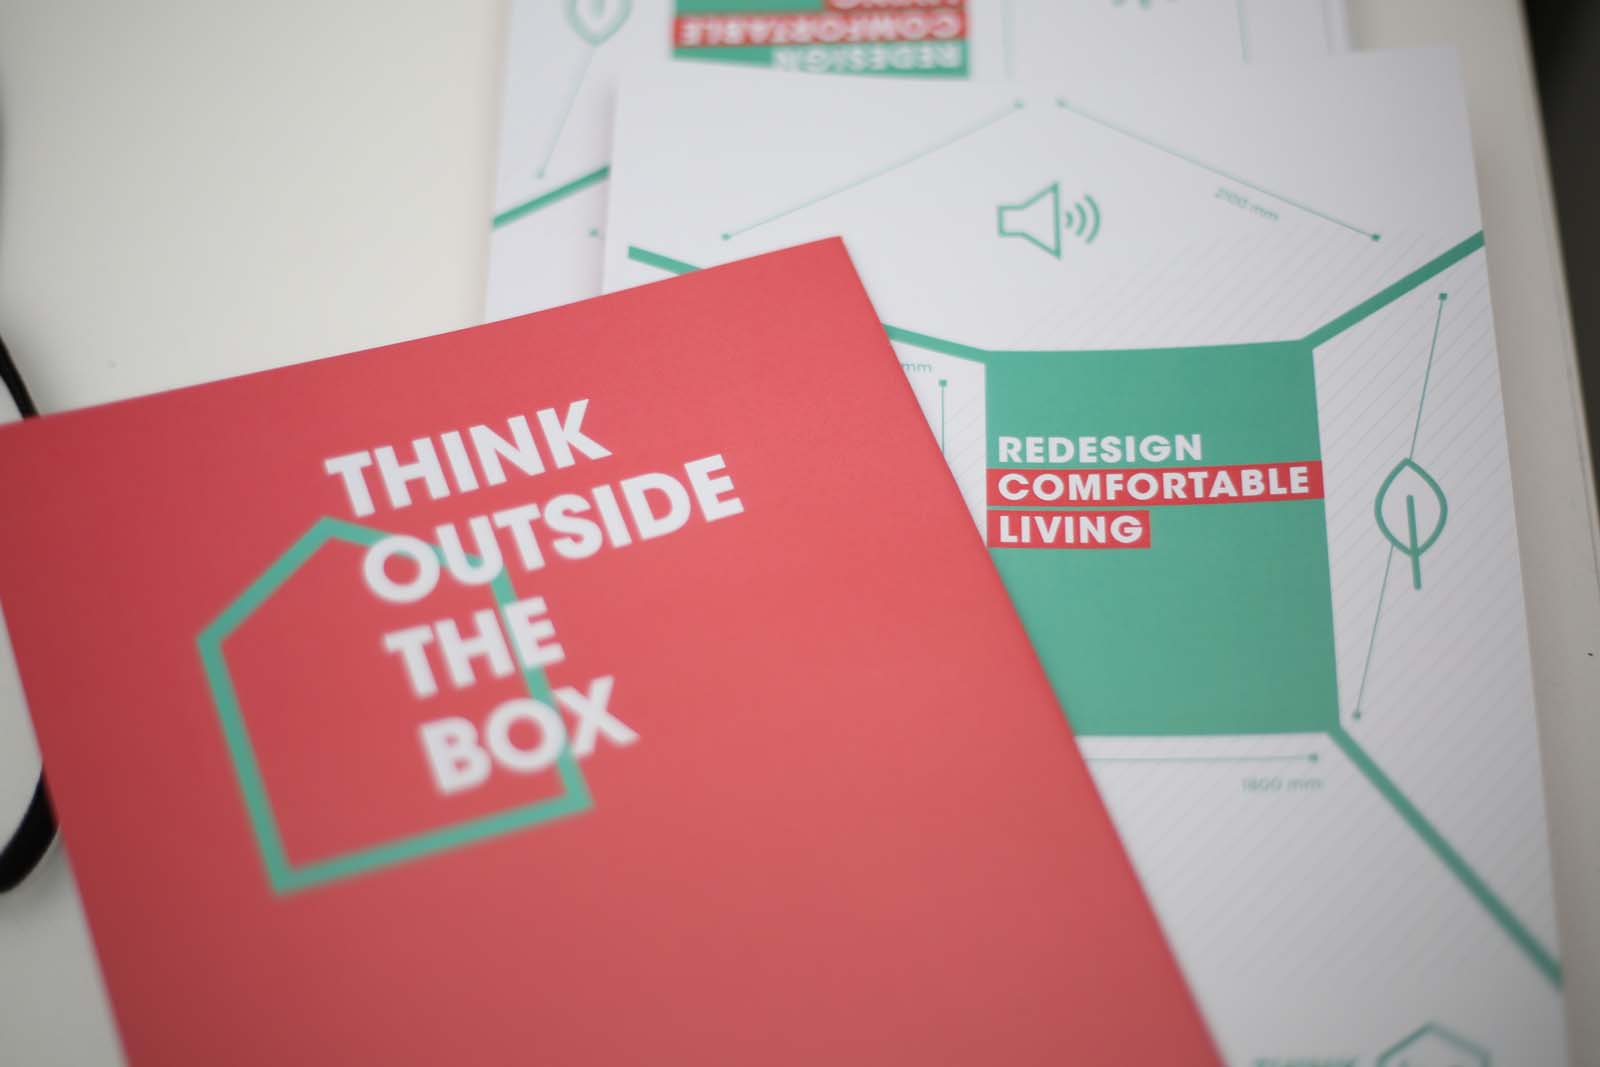 epb congres 'think outside the box' brochure